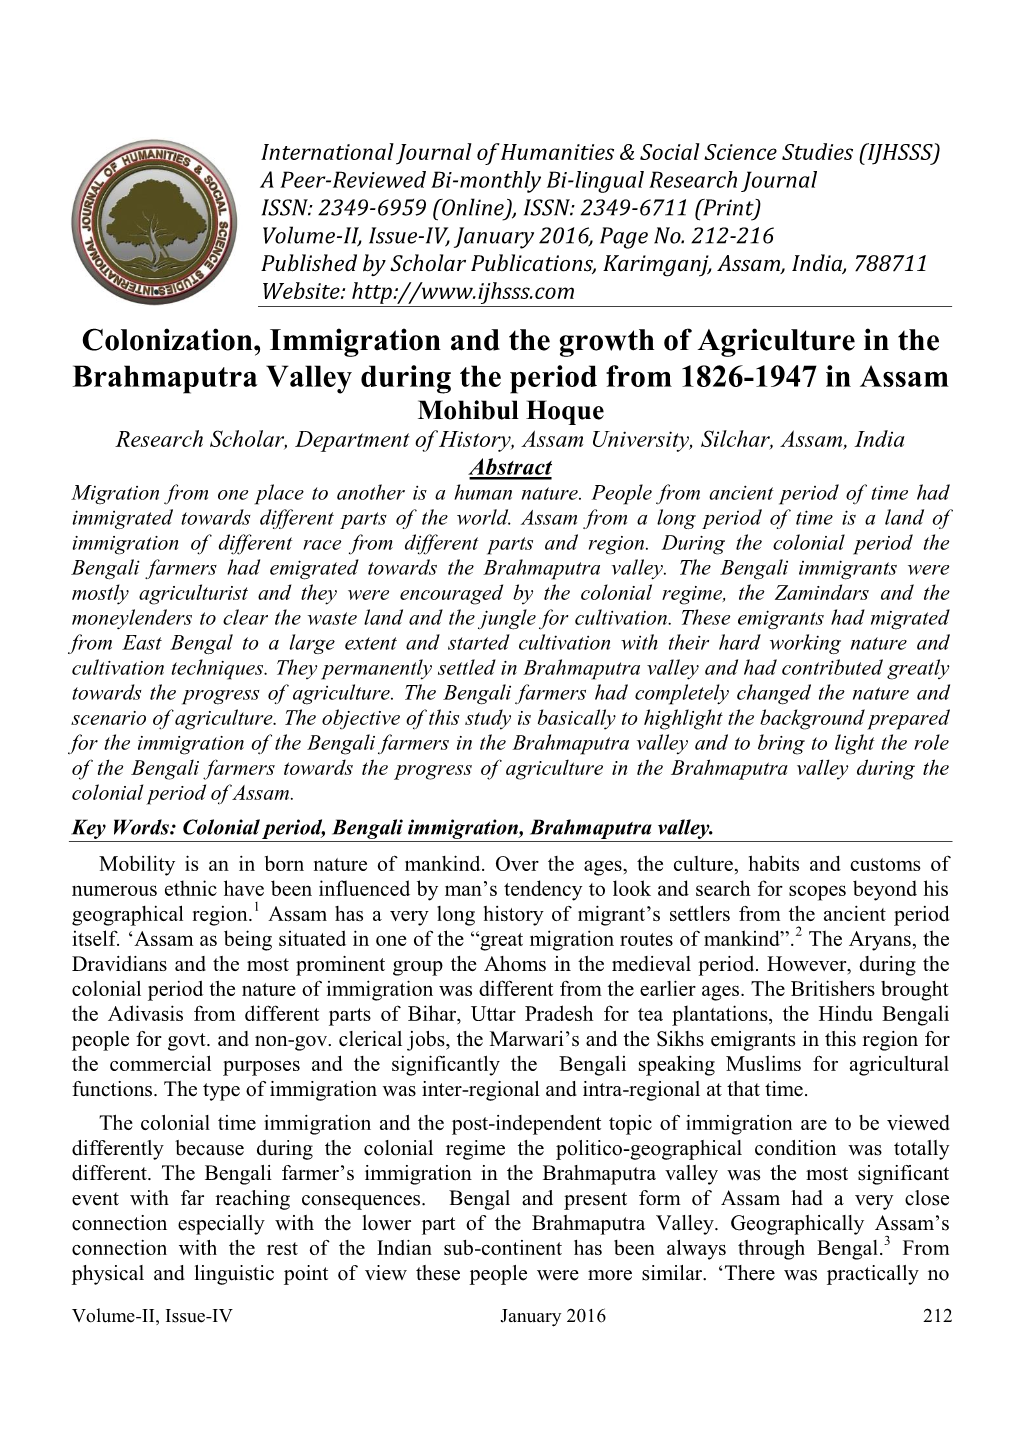 The Role of East Bengal Immigrants in the Agriculture of the Brahmaputra